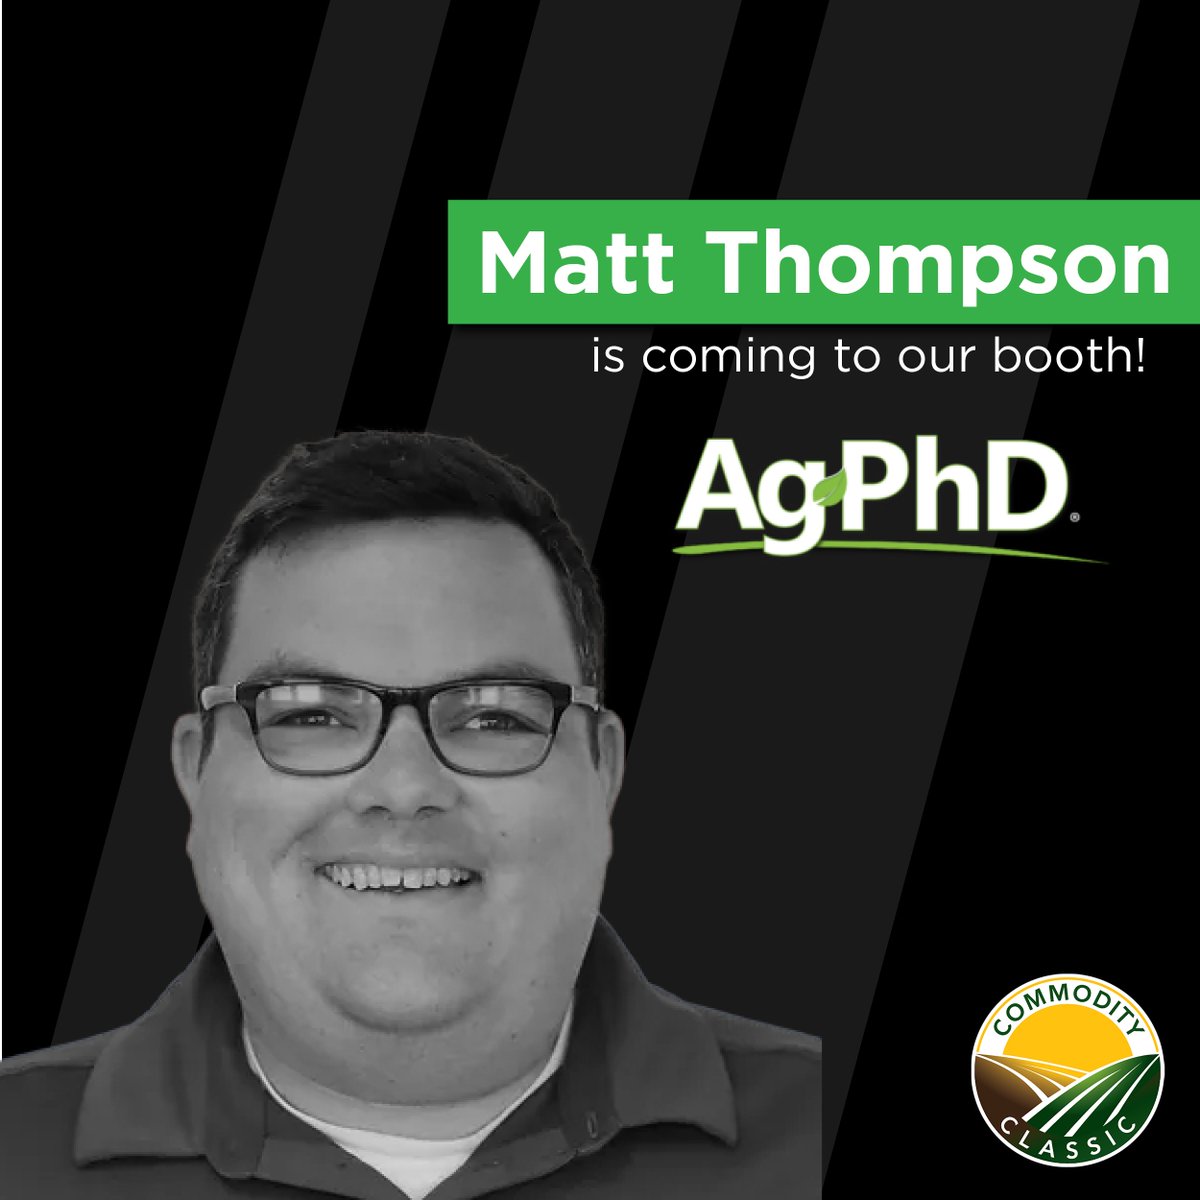 Attending Commodity Classic next week? Come see us and Matt Thompson from @AgPhDMedia at booth #6439 next Thursday at 1:00 PM!